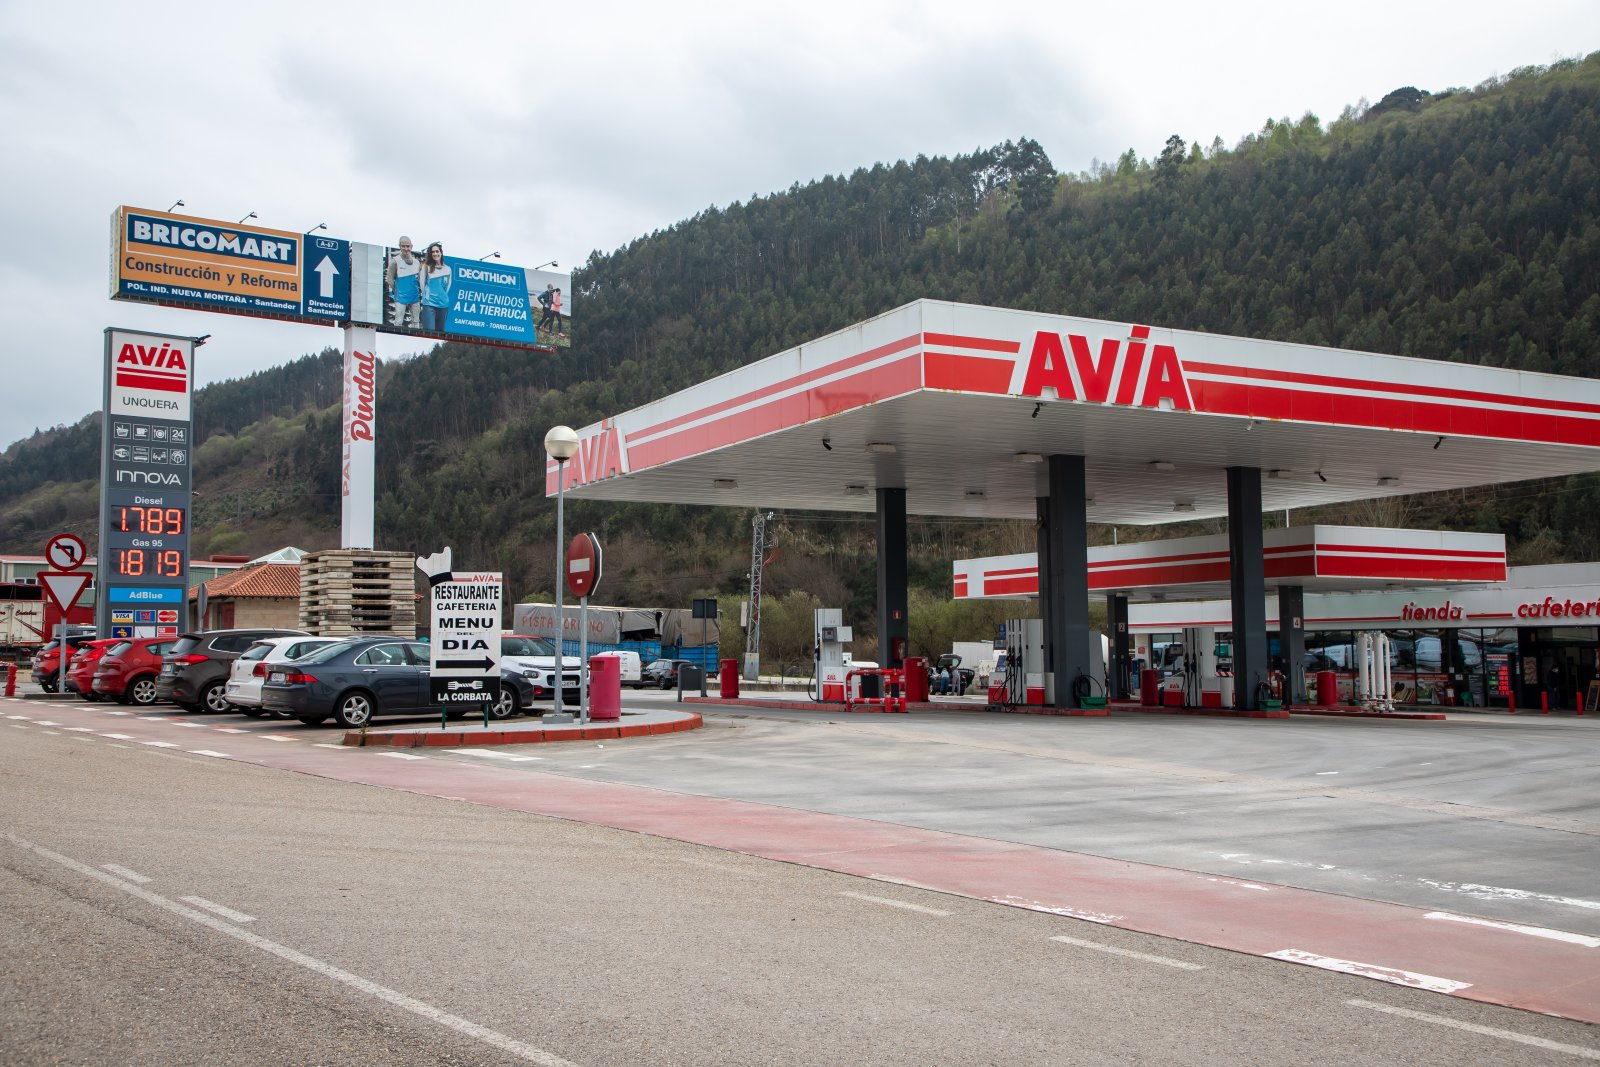 Some low cost gas stations are now more expensive. Why?